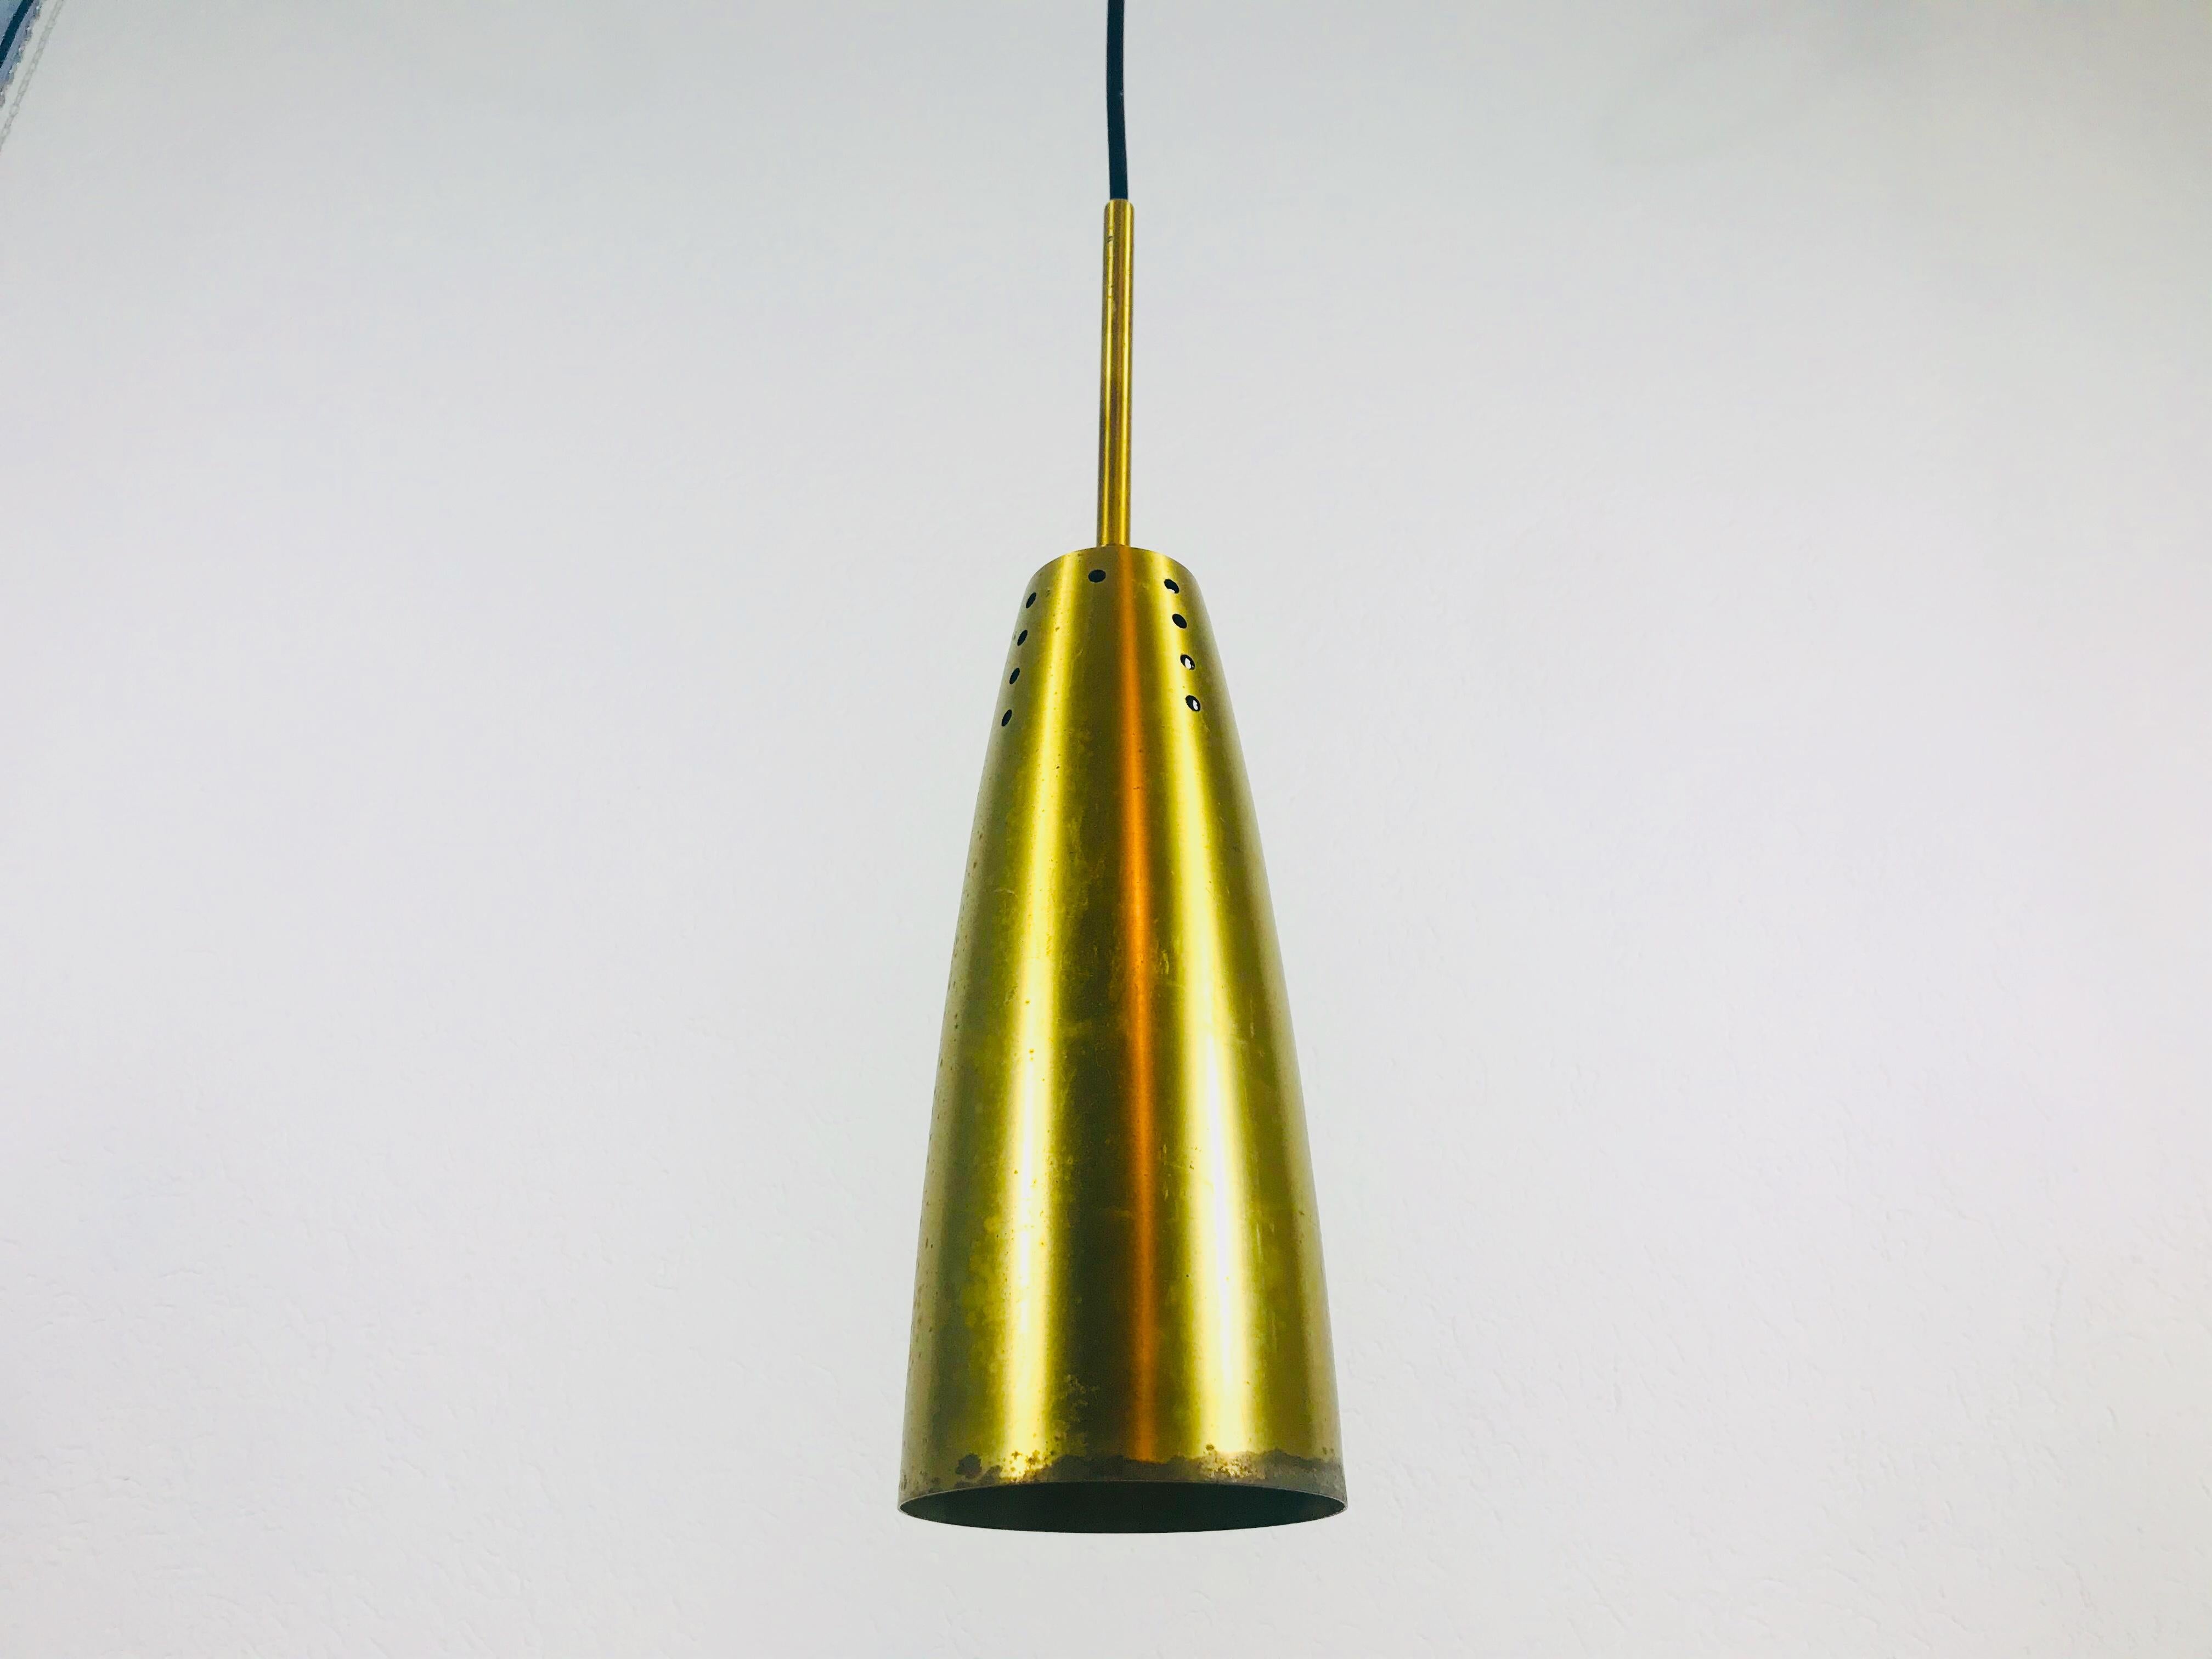 Set of 3 Full Brass Mid-Century Modern Pendant Lamps, 1950s, Germany In Good Condition For Sale In Hagenbach, DE